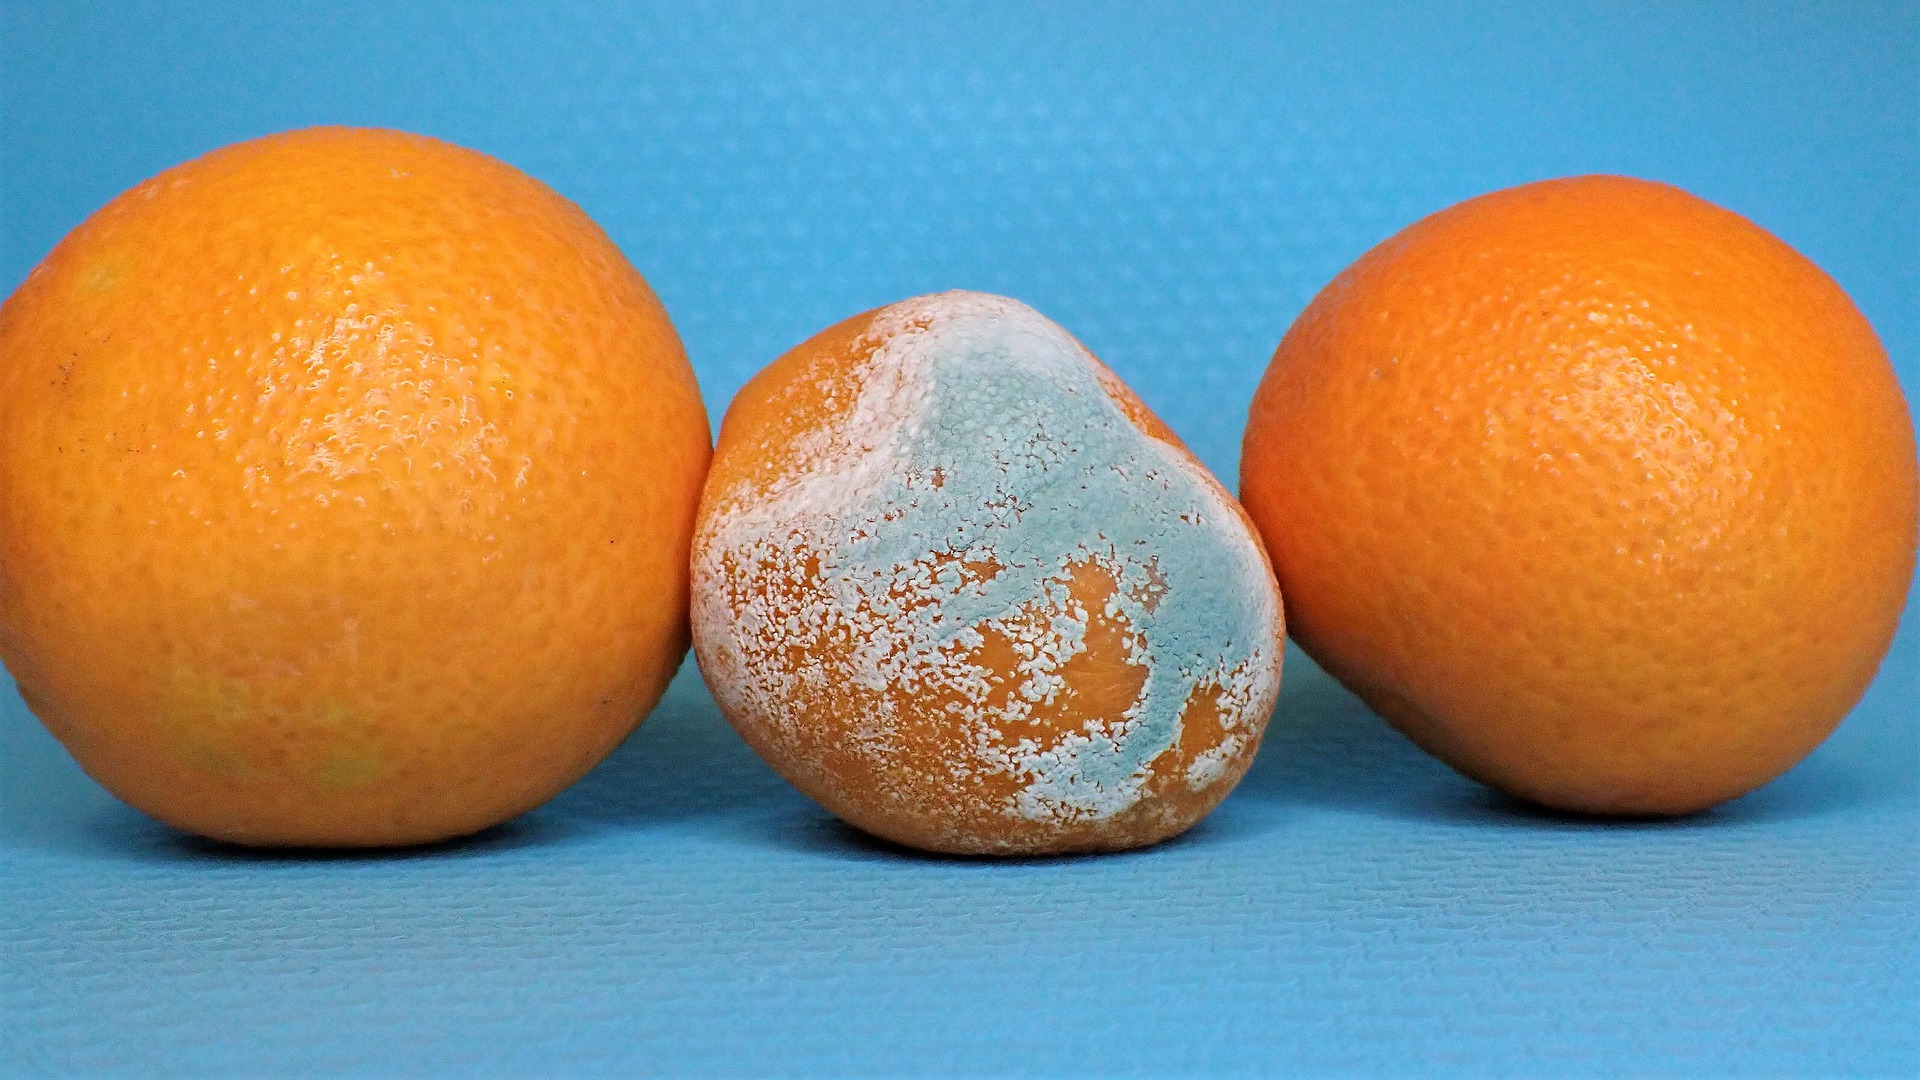 How To Tell If A Clementine Is Bad? - Cully's Kitchen